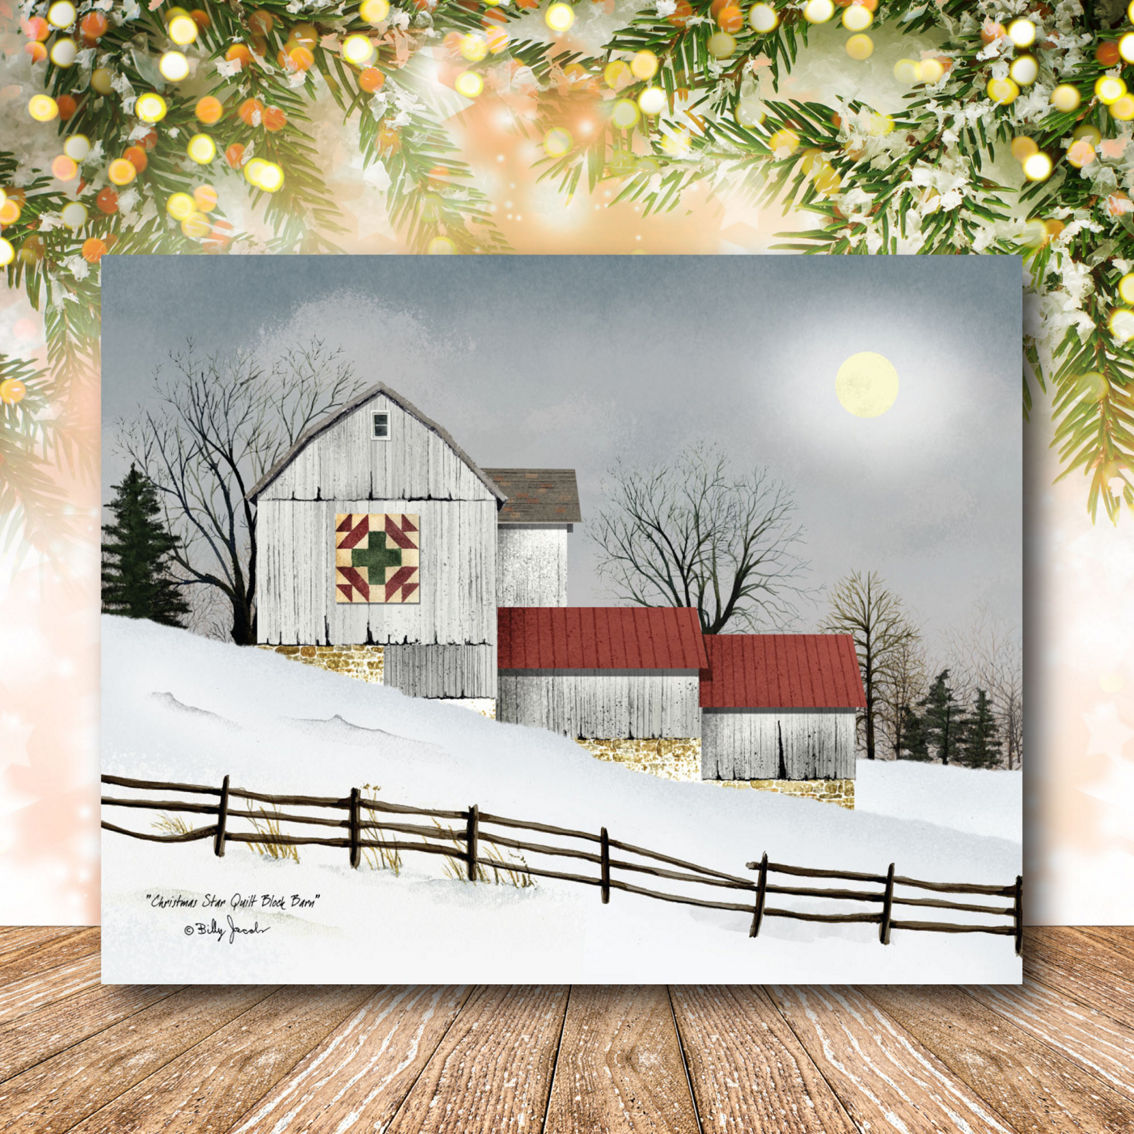 Courtside Market Quilted Barn Gallery Wrapped Canvas Wall Art - Image 2 of 2